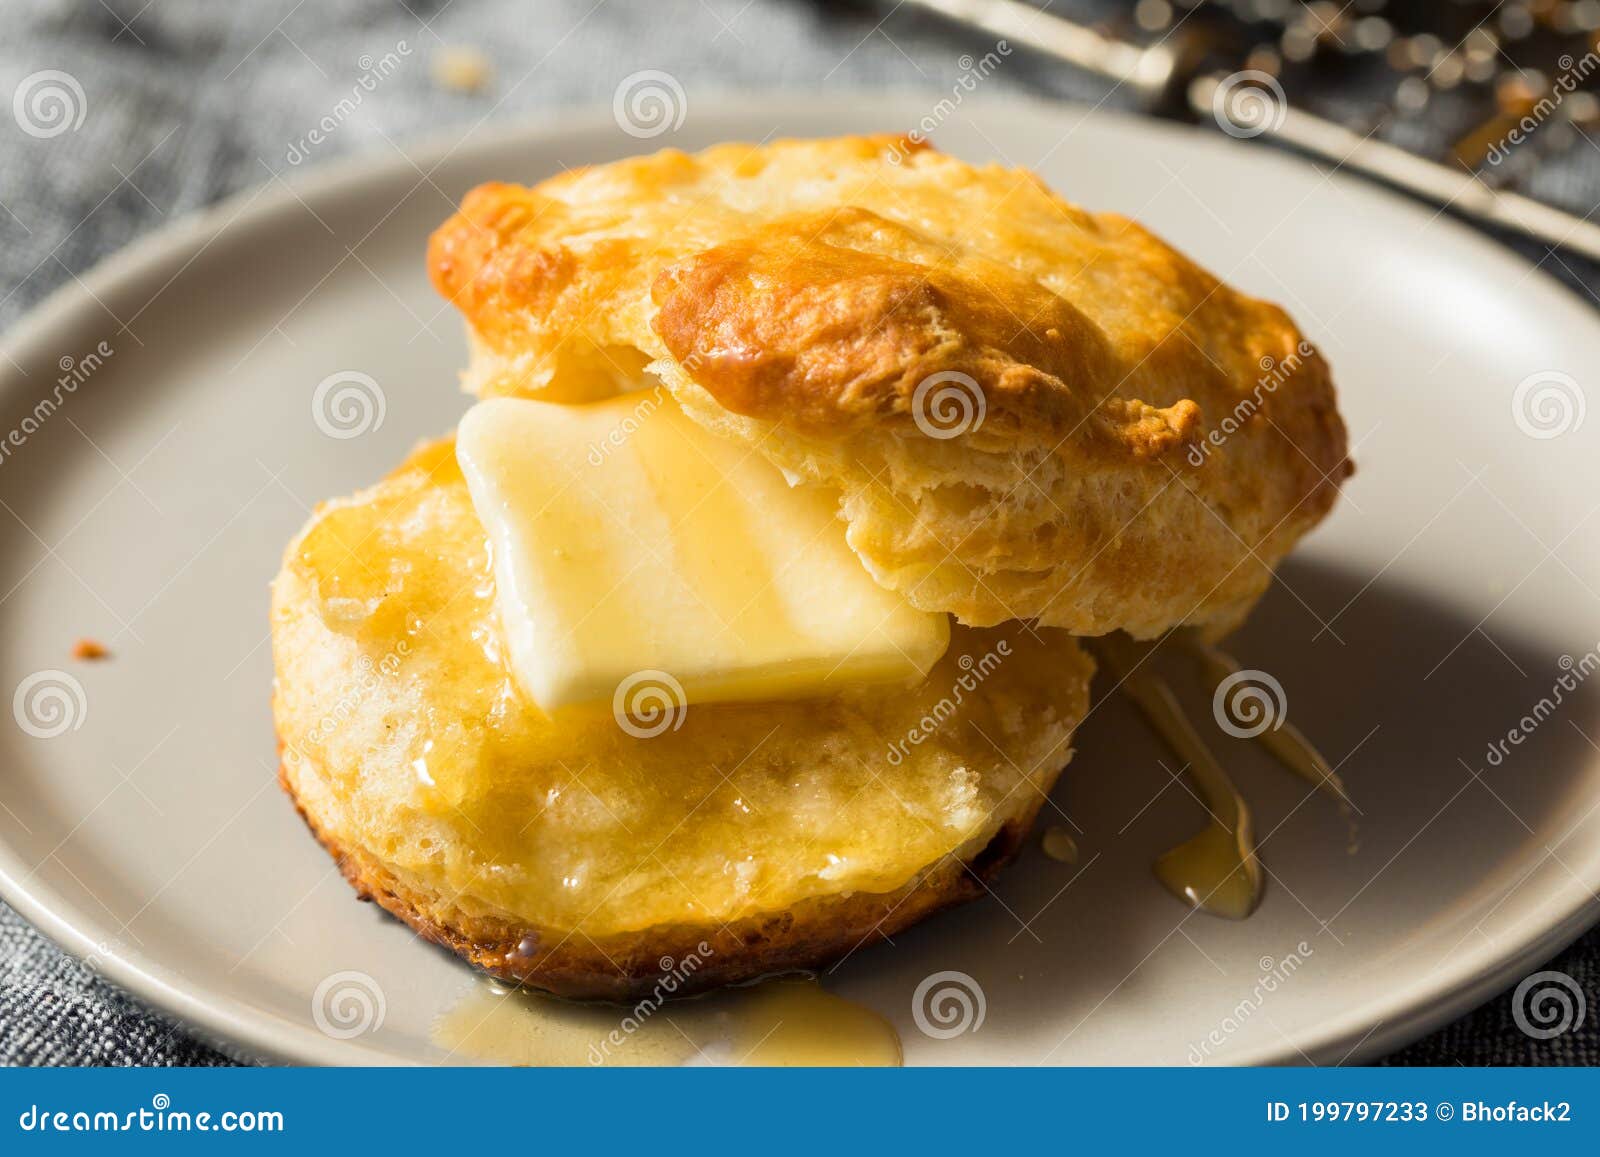 homemade flakey buttermilk biscuits